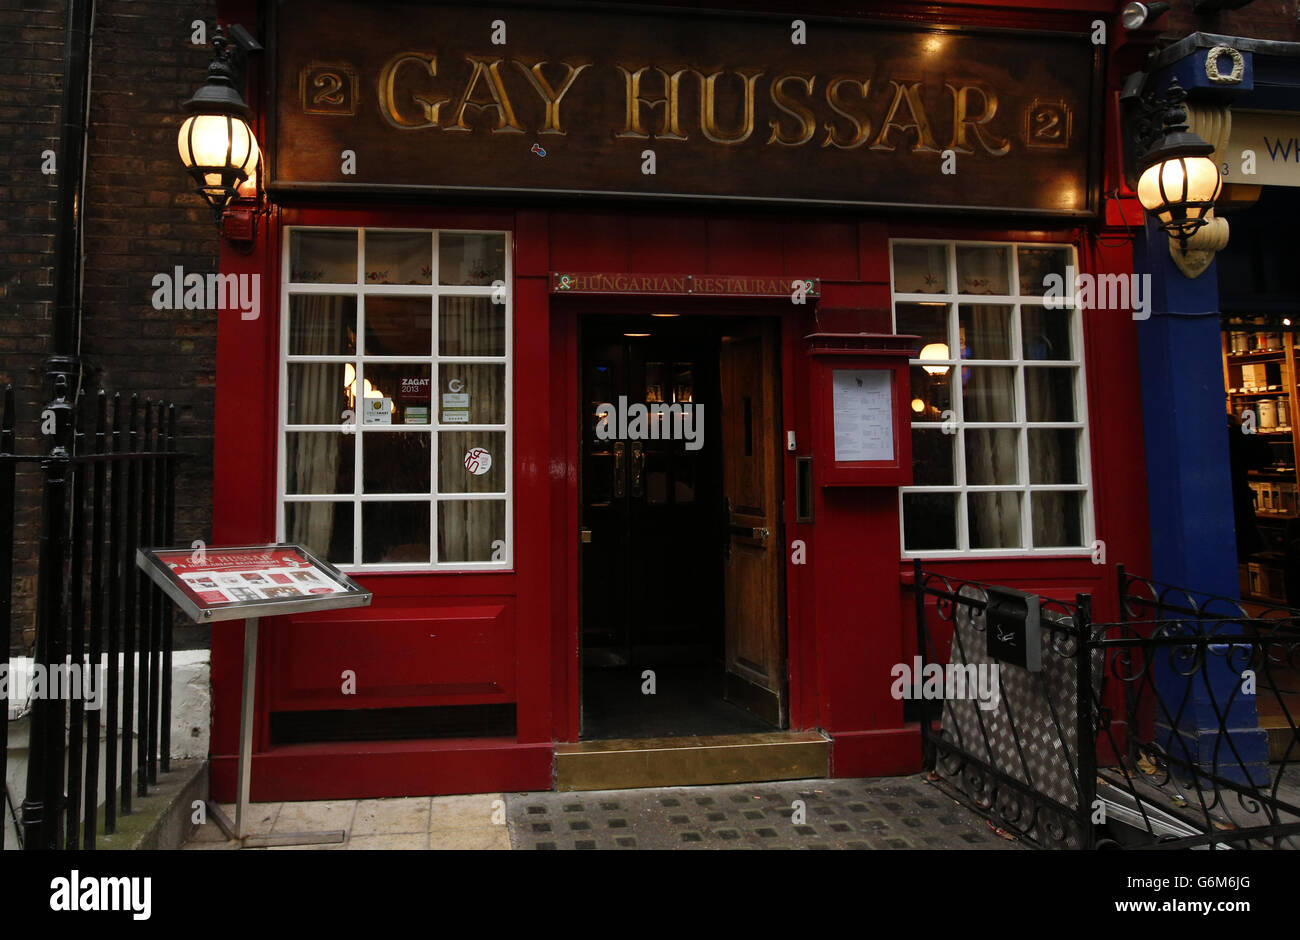 The Gay Hussar Hungarian restaurant, 2 Greek Street, London as a co-operative from the worlds of politics, the media and the arts which formed to save the famous restaurant, is seeking urgent talks with the current owner after submitting a losing bid to buy it. Stock Photo